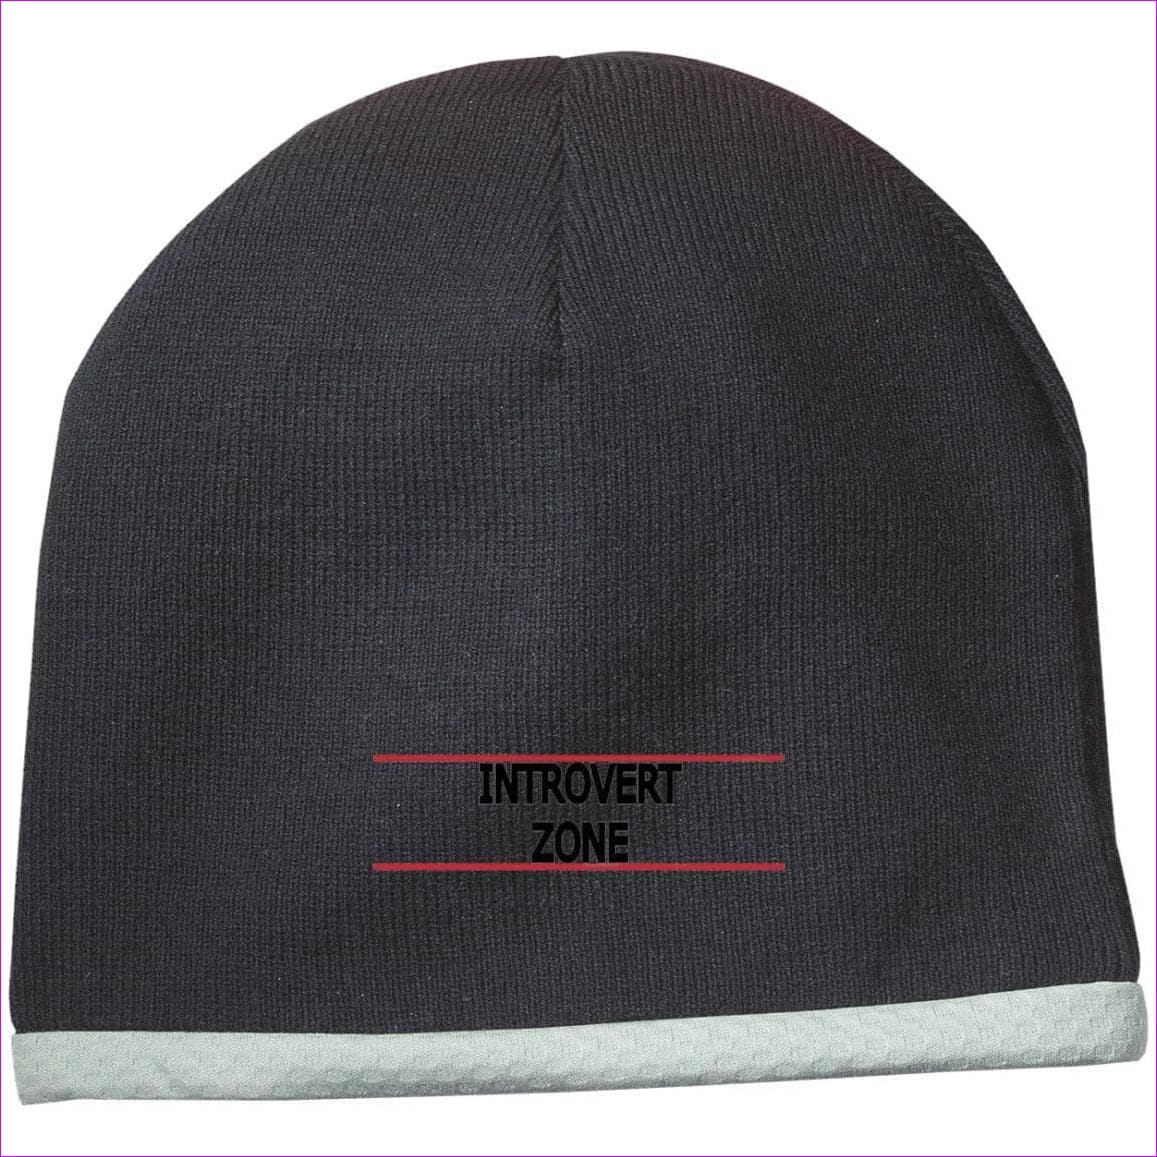 STC15 Performance Knit Cap Black One Size Introvert Zone Embroidered Knit Cap, Cap, Beanie - Hat at TFC&H Co.